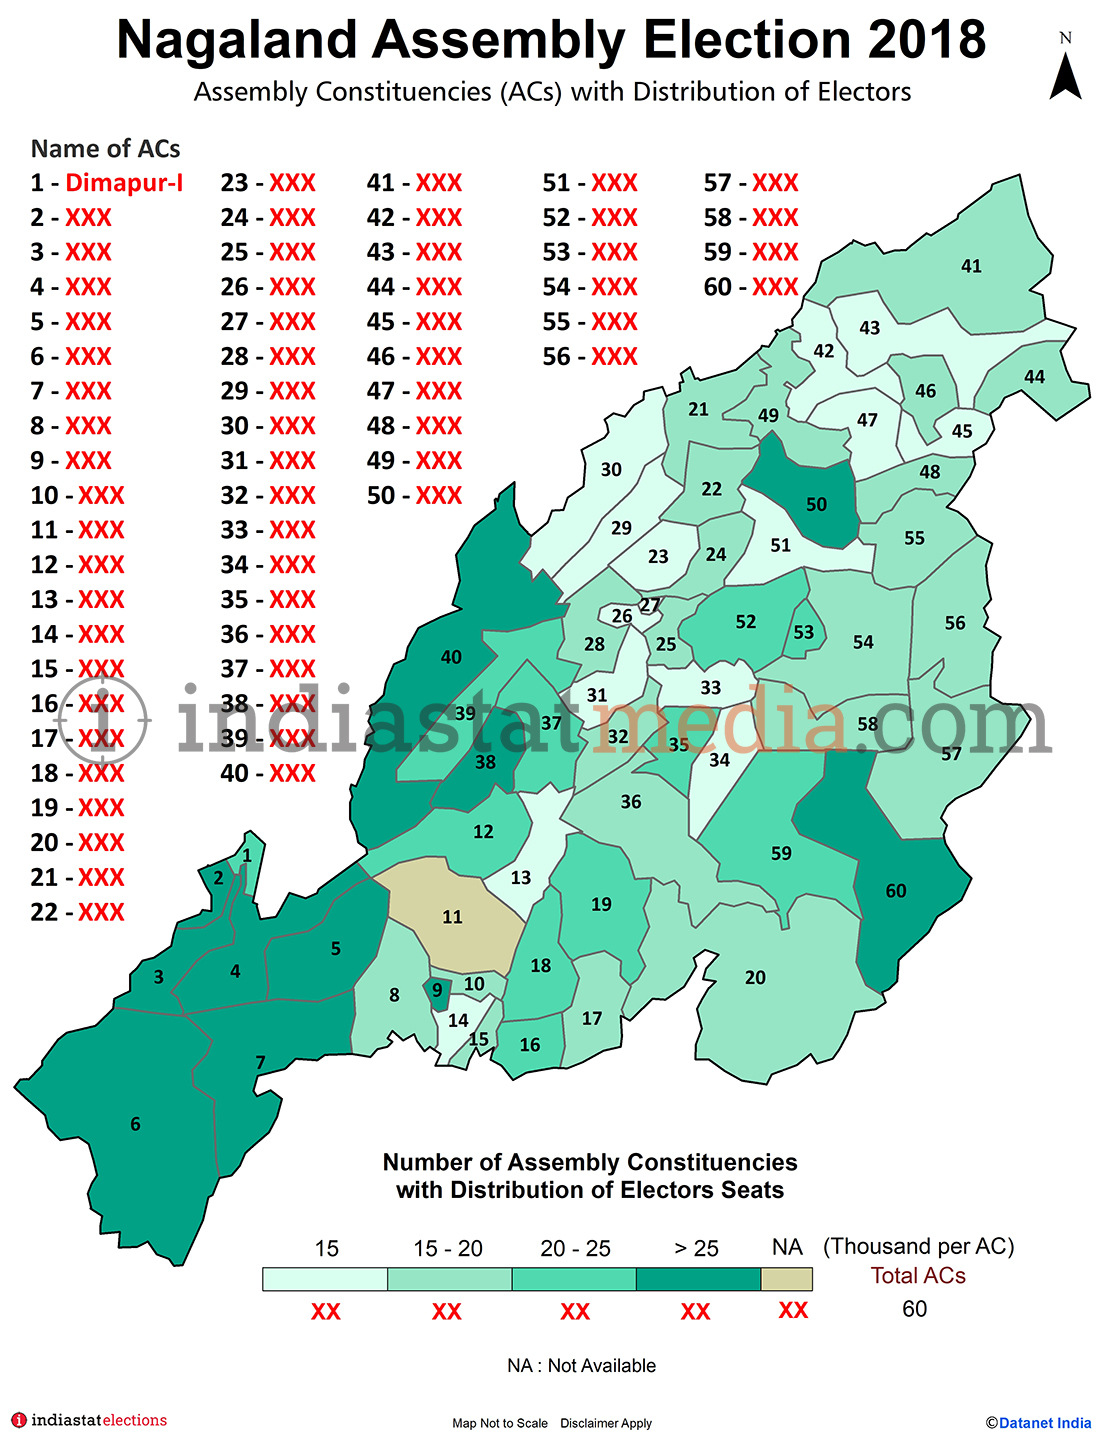 Assembly Constituencies (ACs) with Distribution of Electors in Nagaland (Assembly Election - 2018)